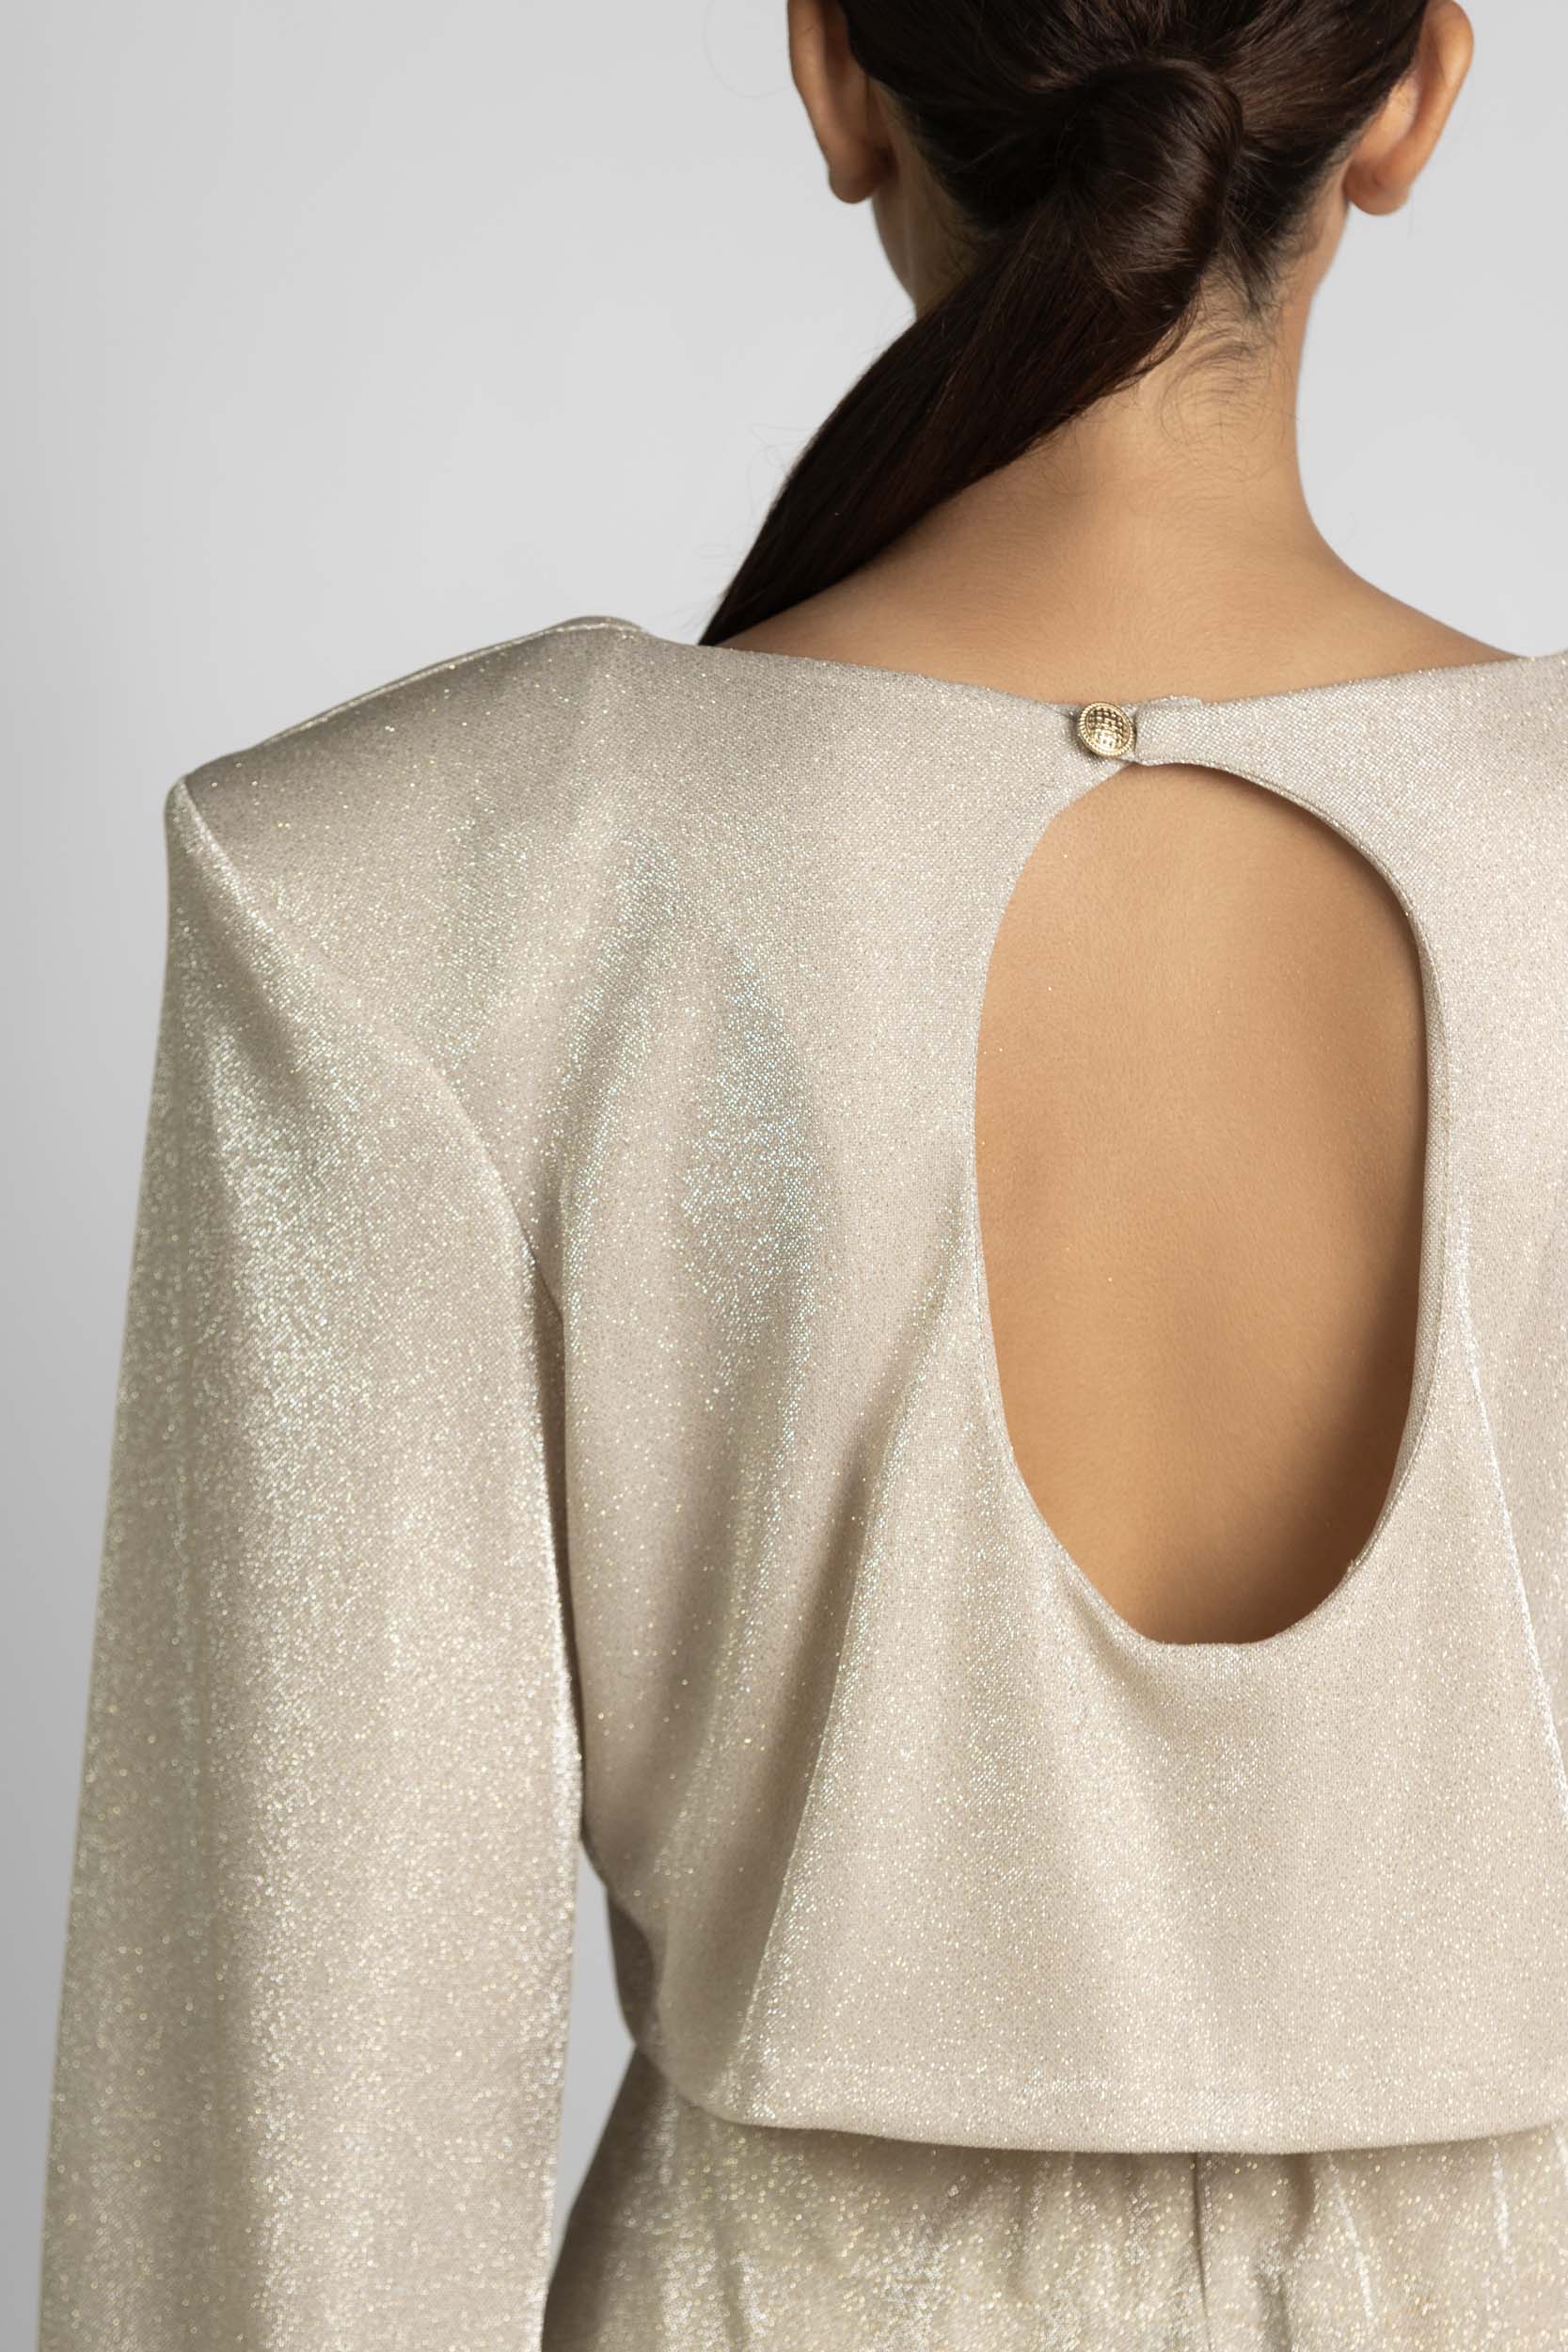 Gold Glitter Transparent Top with long sleeves, open back details.